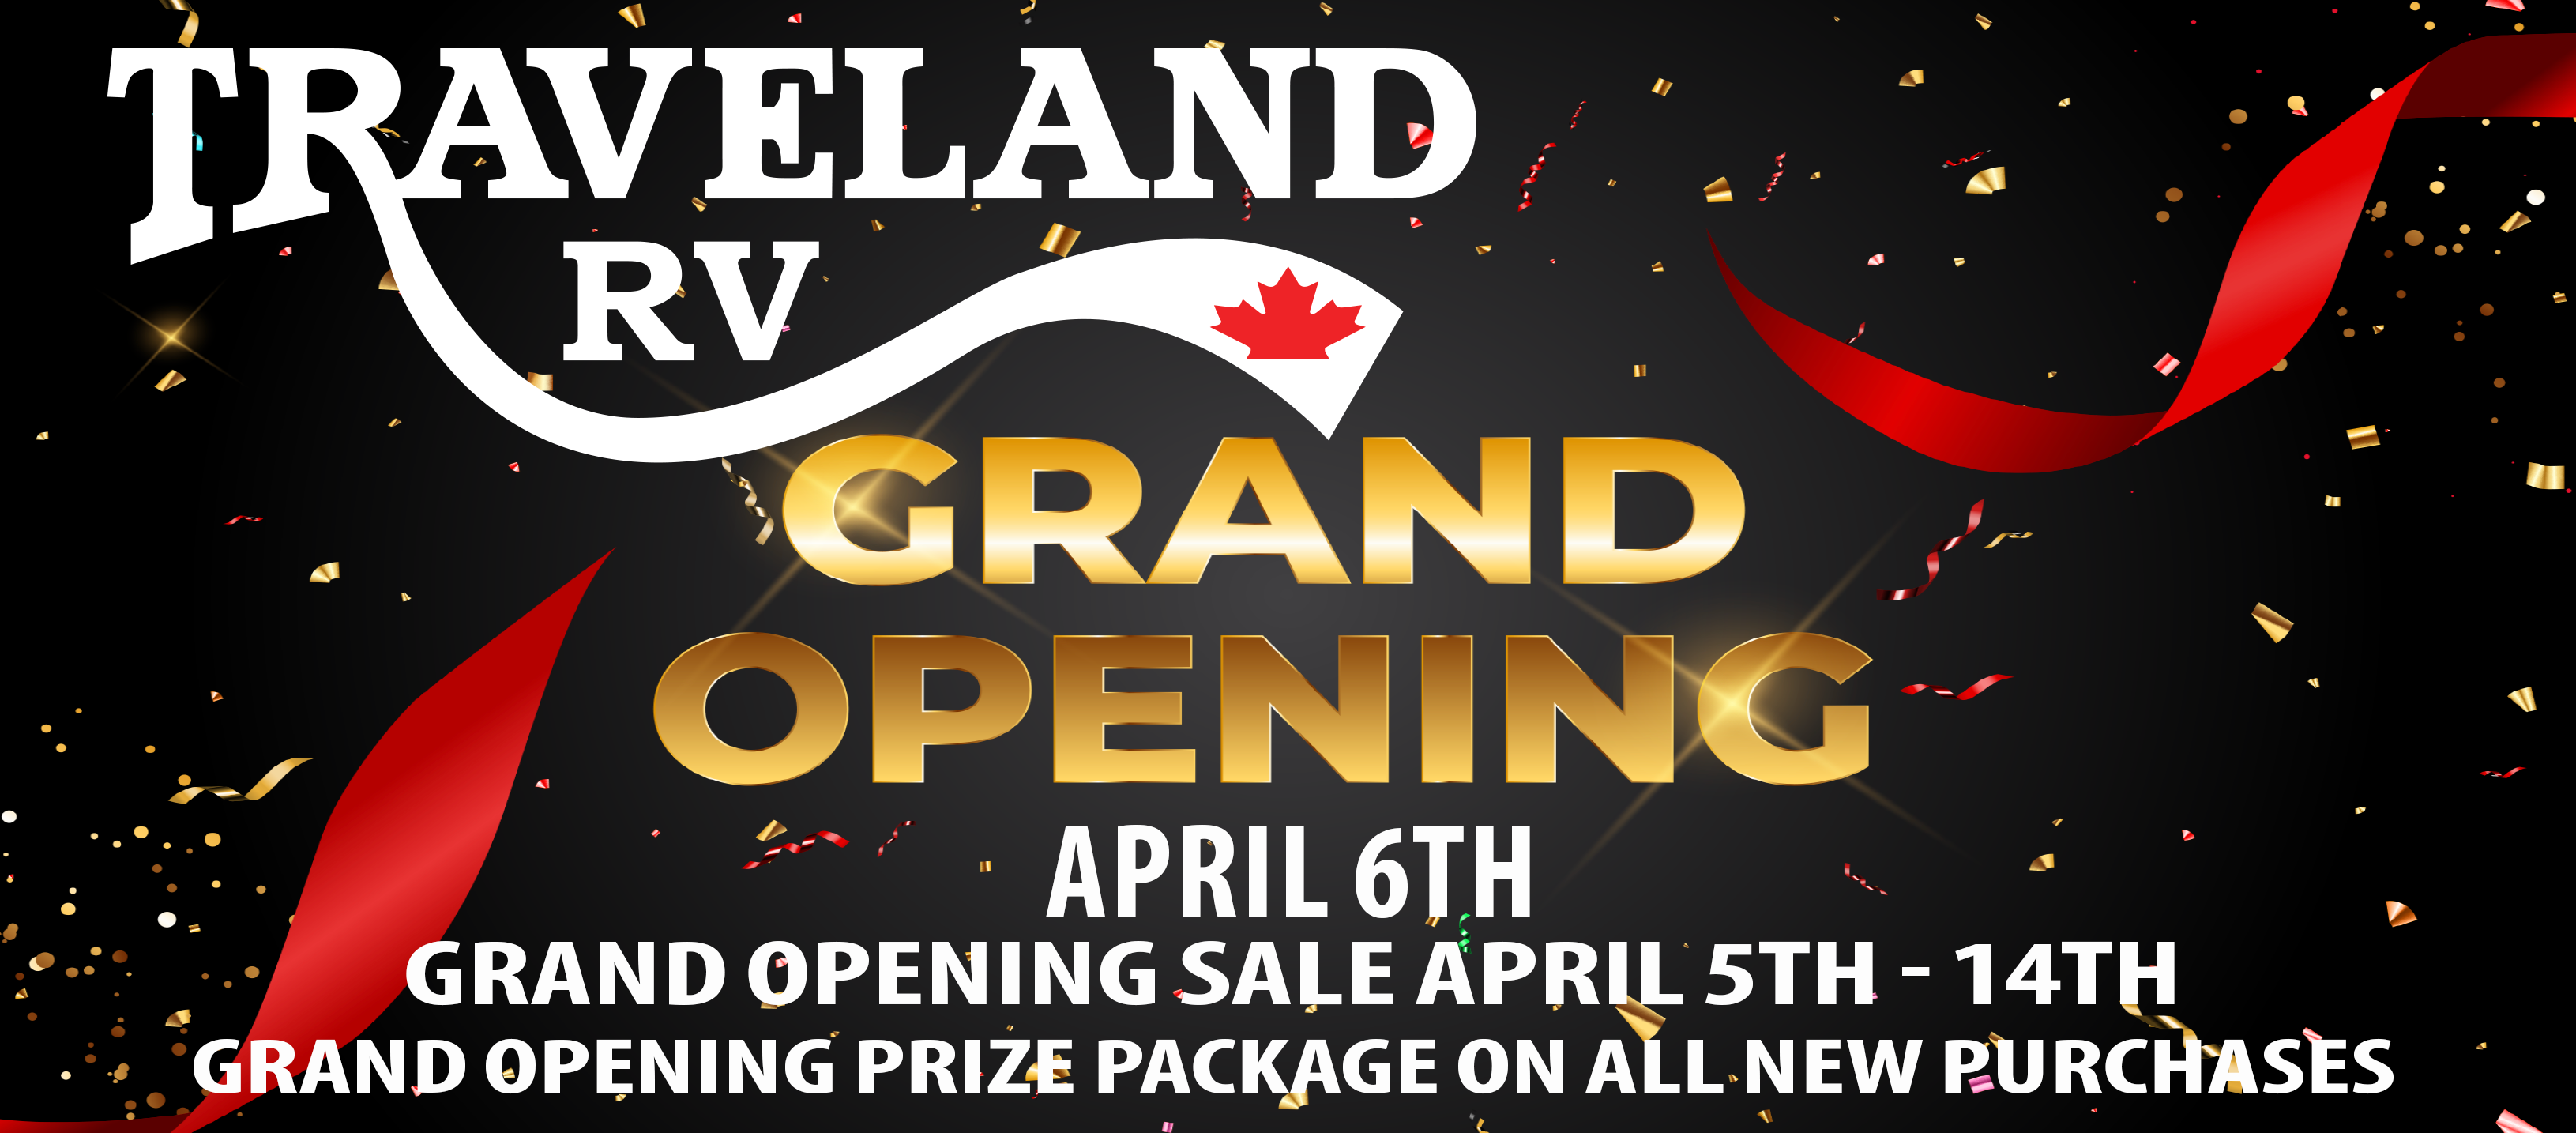 Grand Opening Sales Event - Traveland RV Airdrie